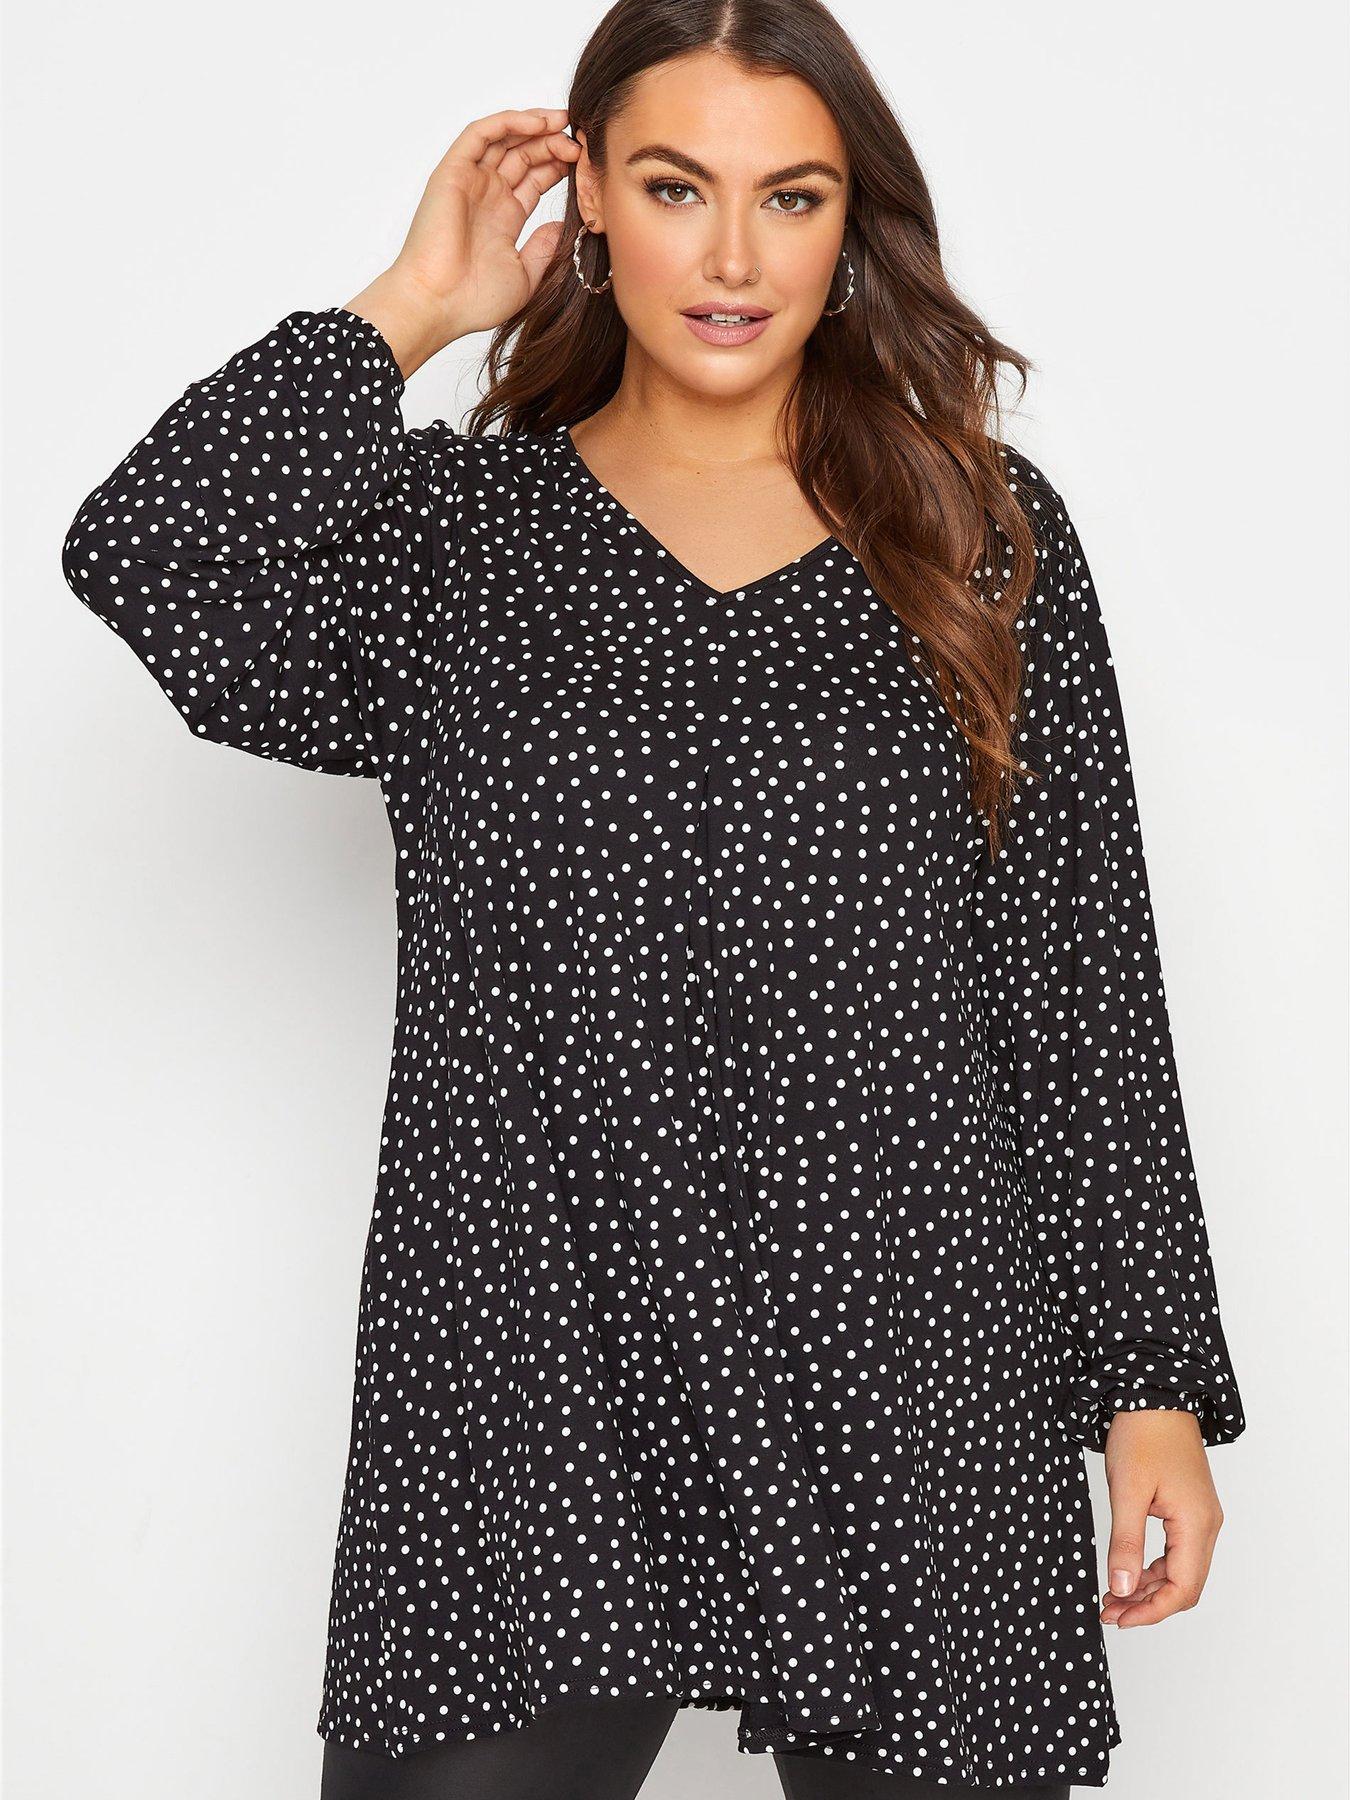  Yours Spotty Pleated Swing Top - Black